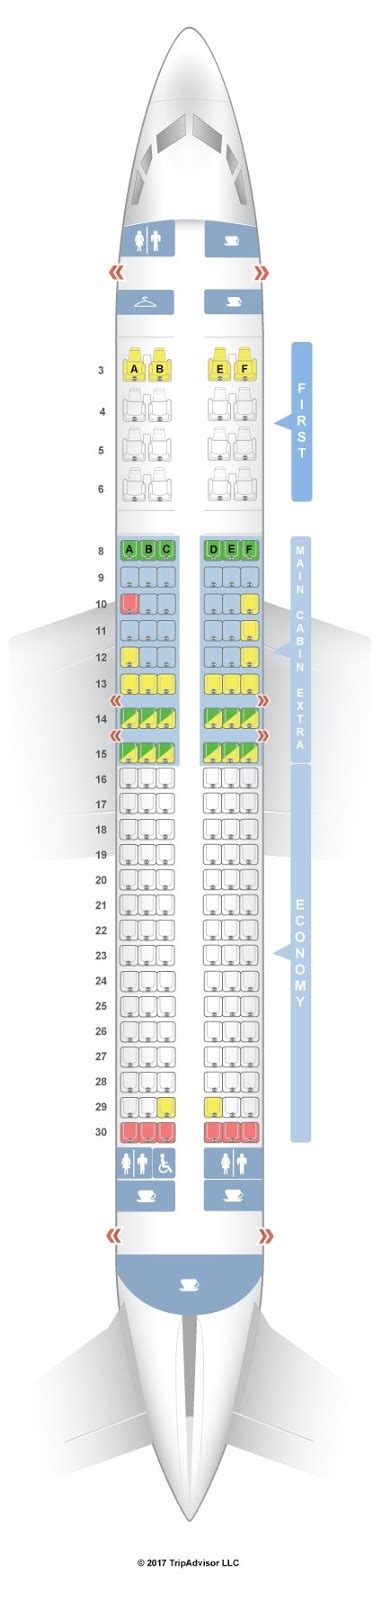 Boeing 737 800 seating chart american airlines. For your next American Airlines flight, use this seating chart to get the most comfortable seats, legroom, ... Boeing 737-800 (738) Layout 2; Boeing 777-200 (777) Boeing 777-300ER (77W) Boeing 787-8 (788) ... It's bad enough it should be in the tips on the seat guru map, and a showstopper for night flights. ... 